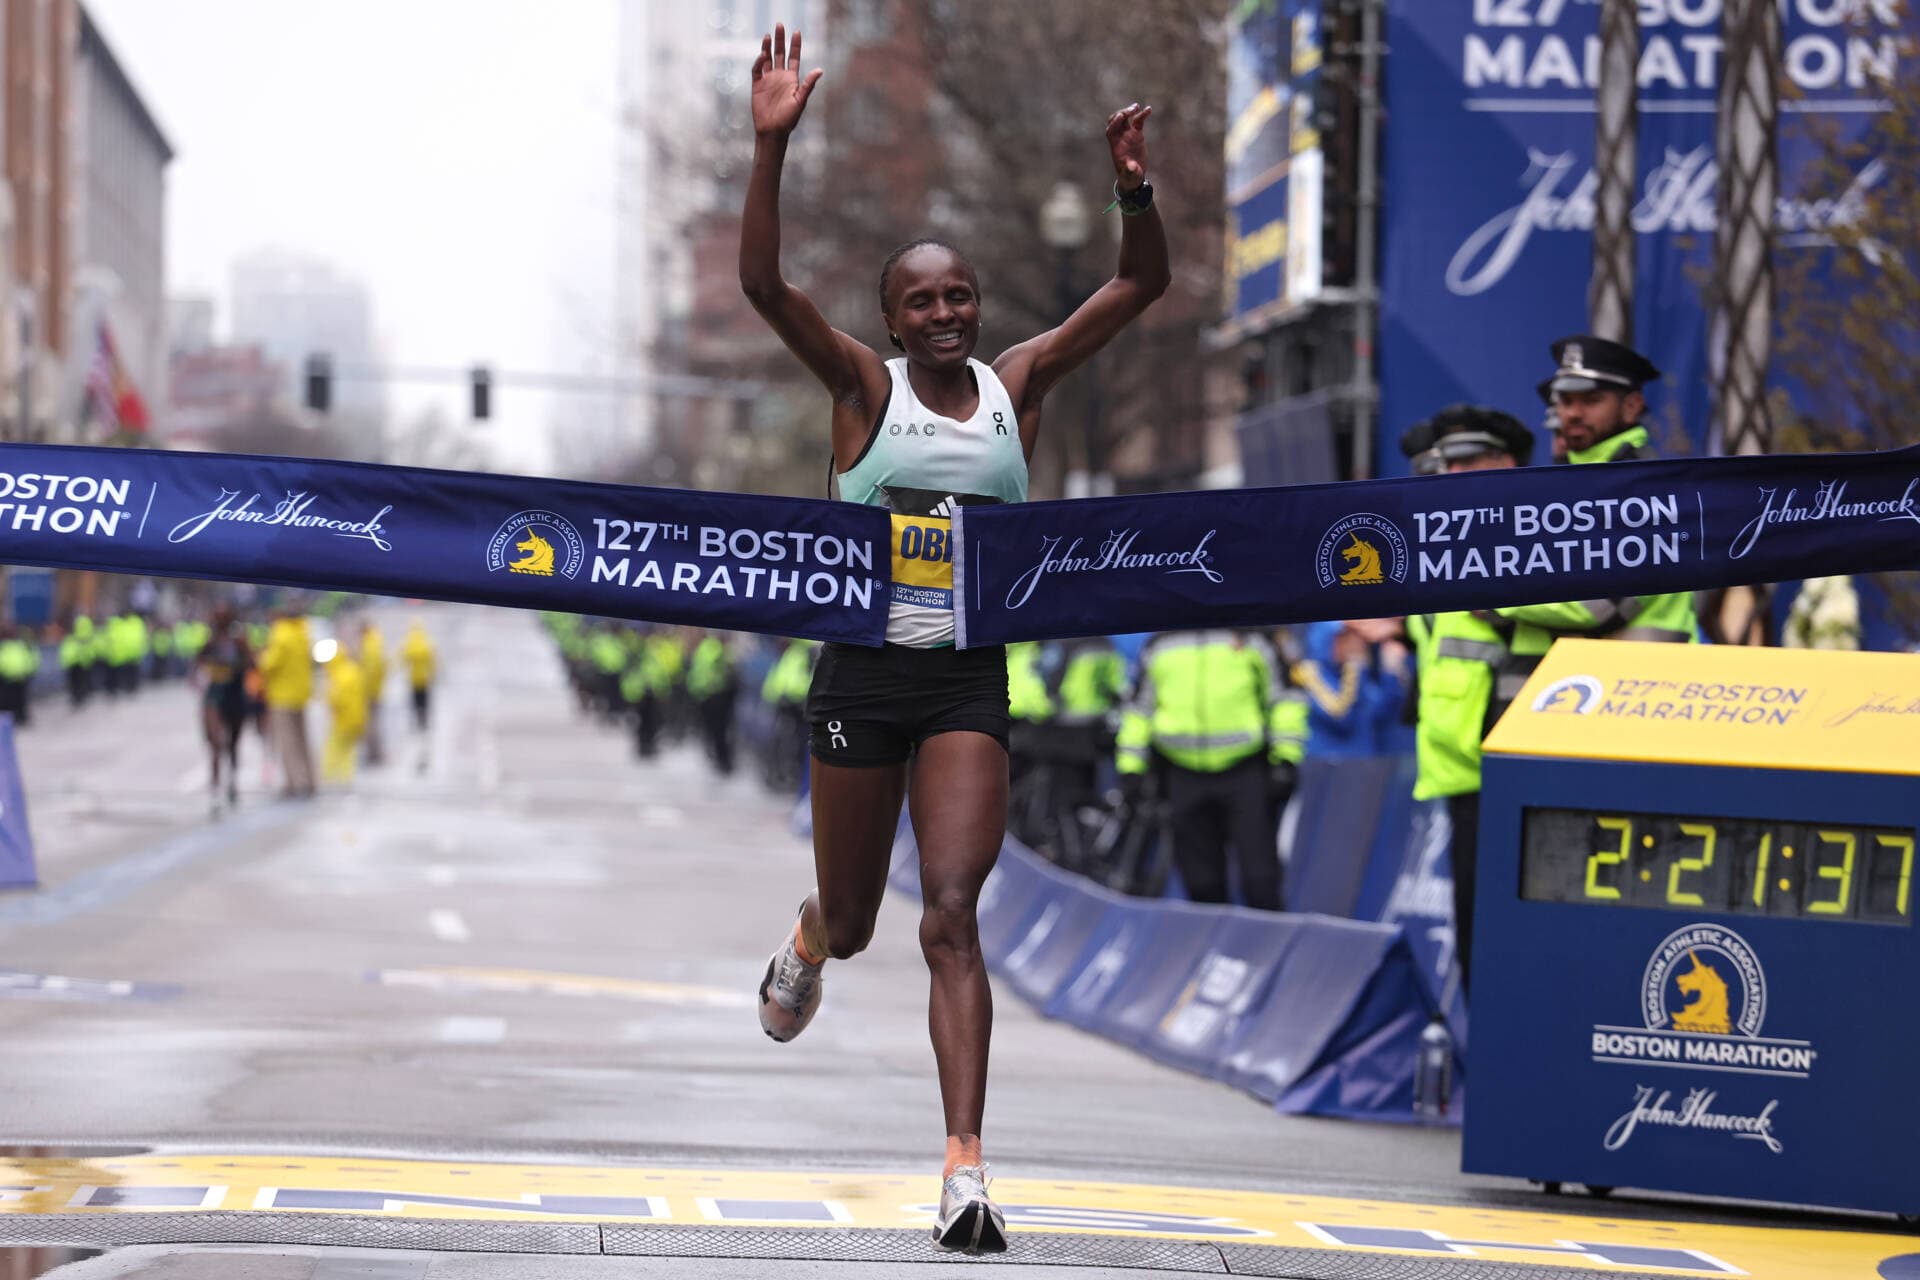 Hellen Obiri, of Kenya, crosses the finish line and takes first place in the professional Women's Division during the 127th Boston Marathon on April 17, 2023. (Maddie Meyer/Getty Images)